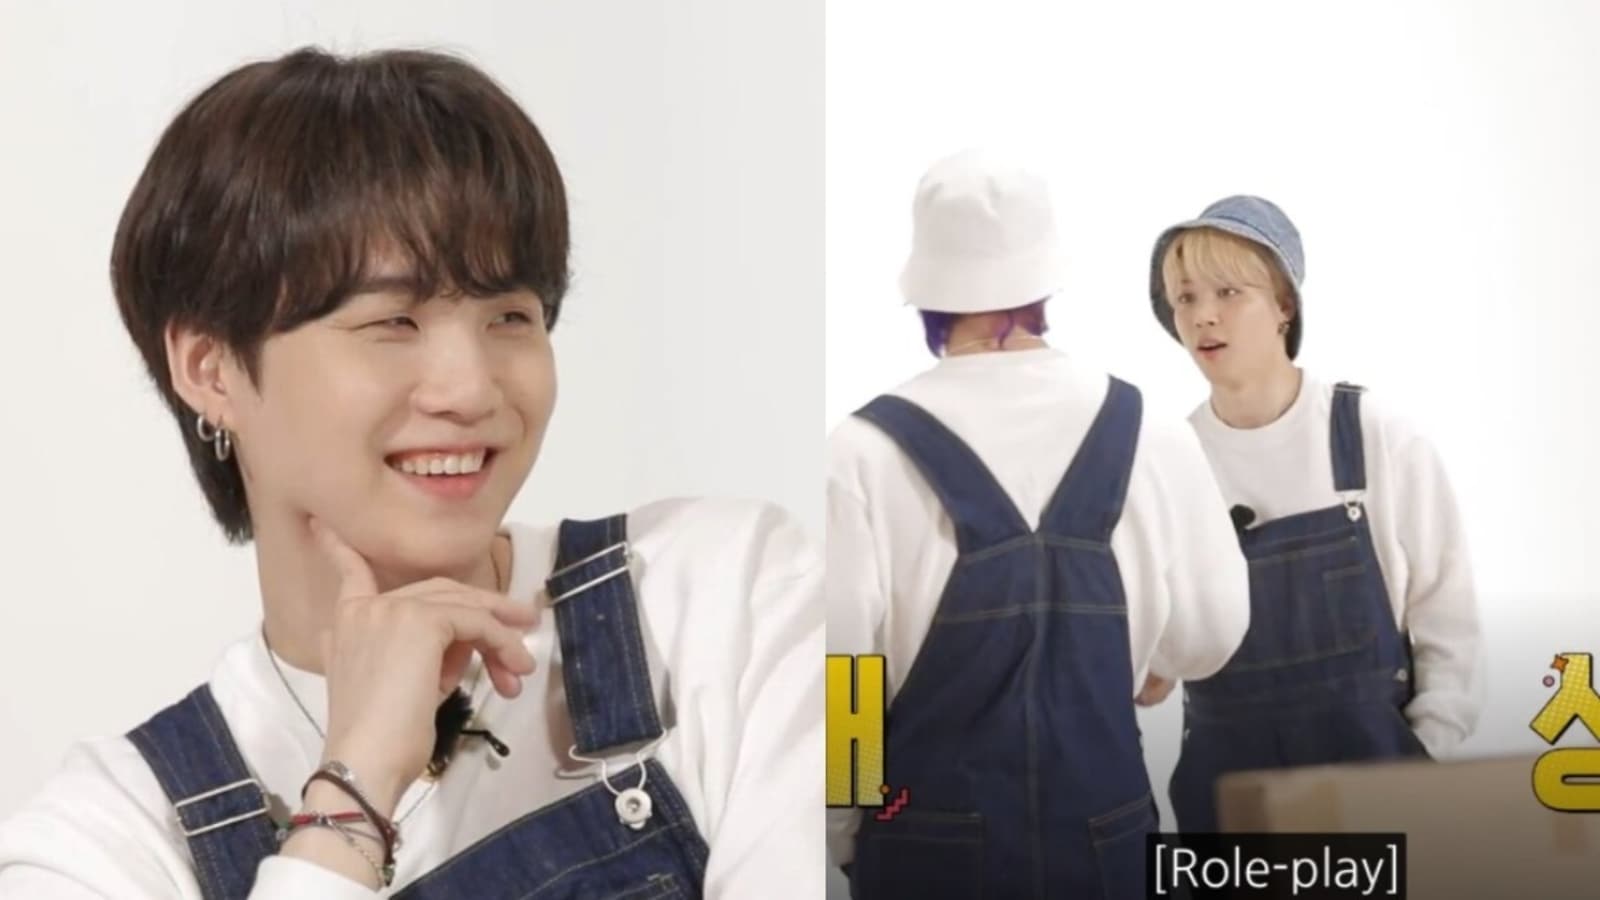 Run Bts Episode 148: Army Call Rm, Suga And Other Members 'Husband  Material', Jimin And Jungkook Role Play - Hindustan Times